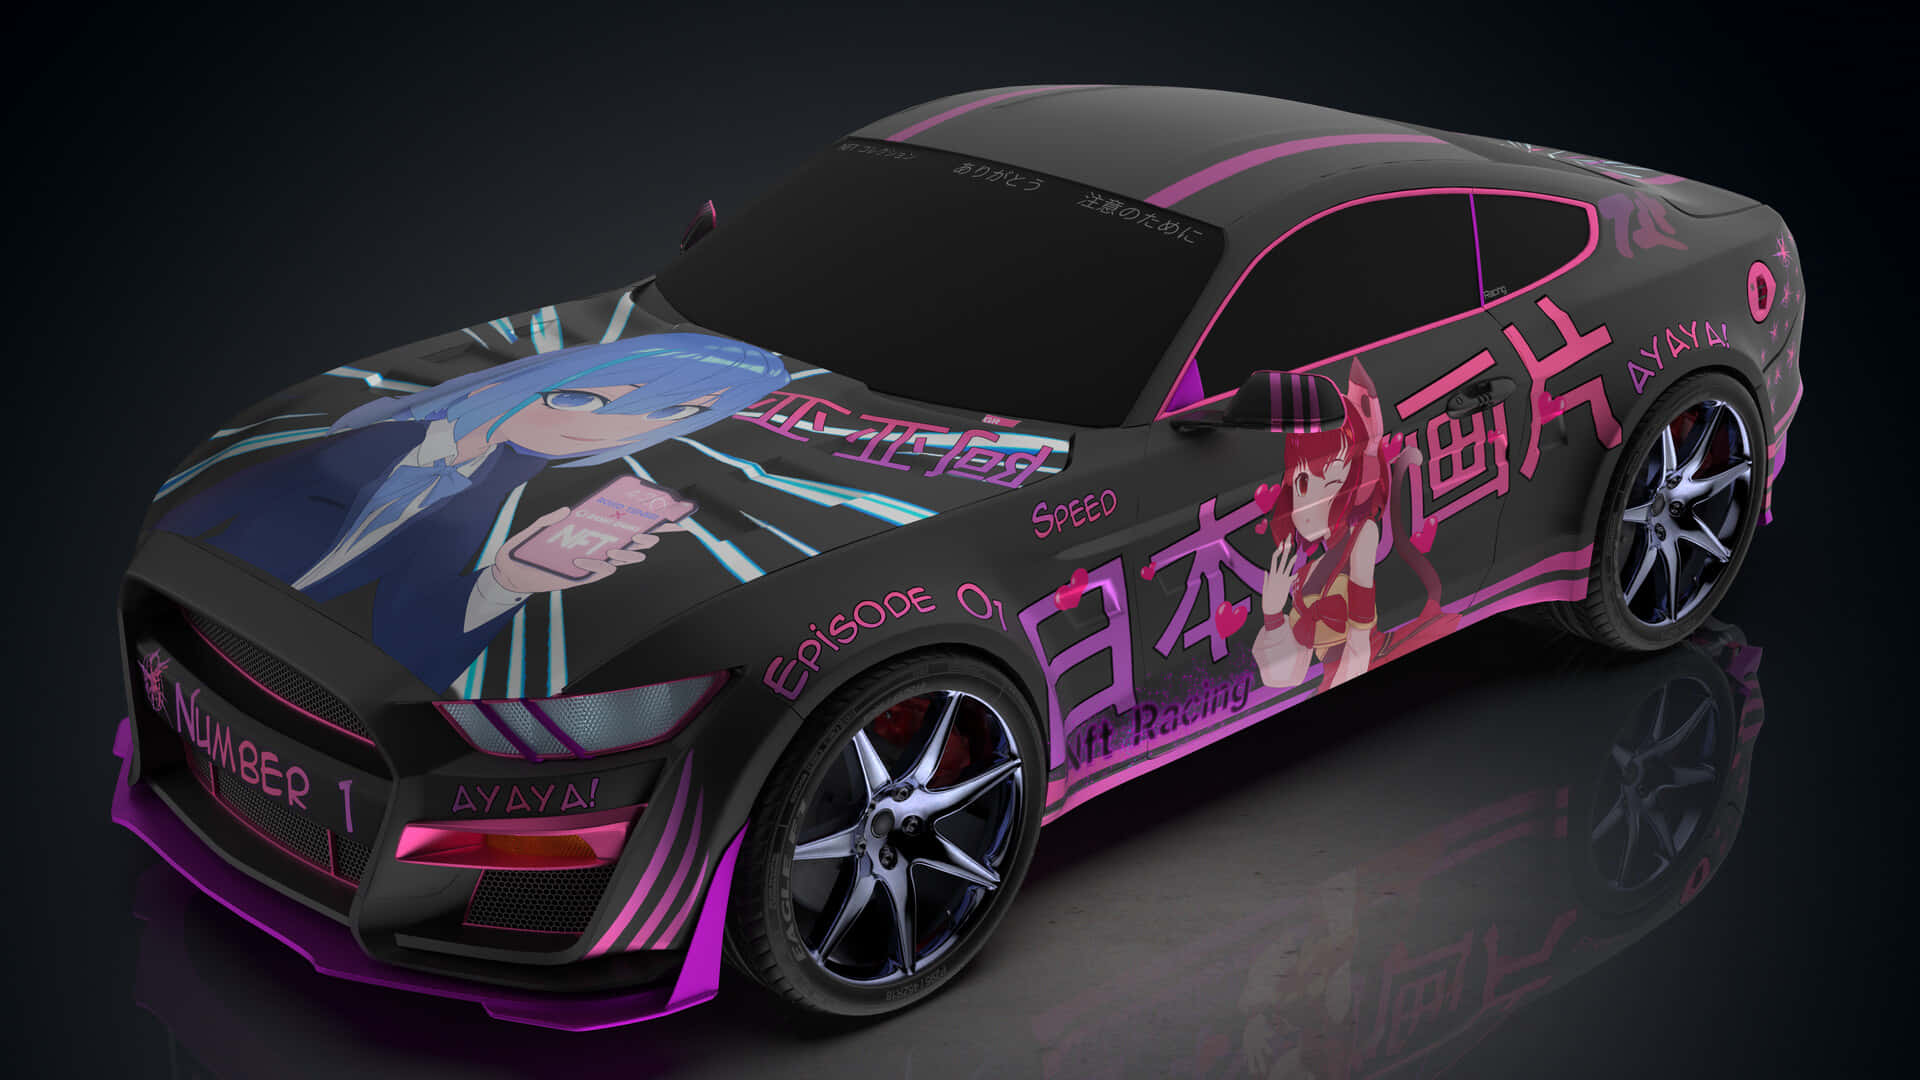 Download Unstoppable Power - An Anime Car